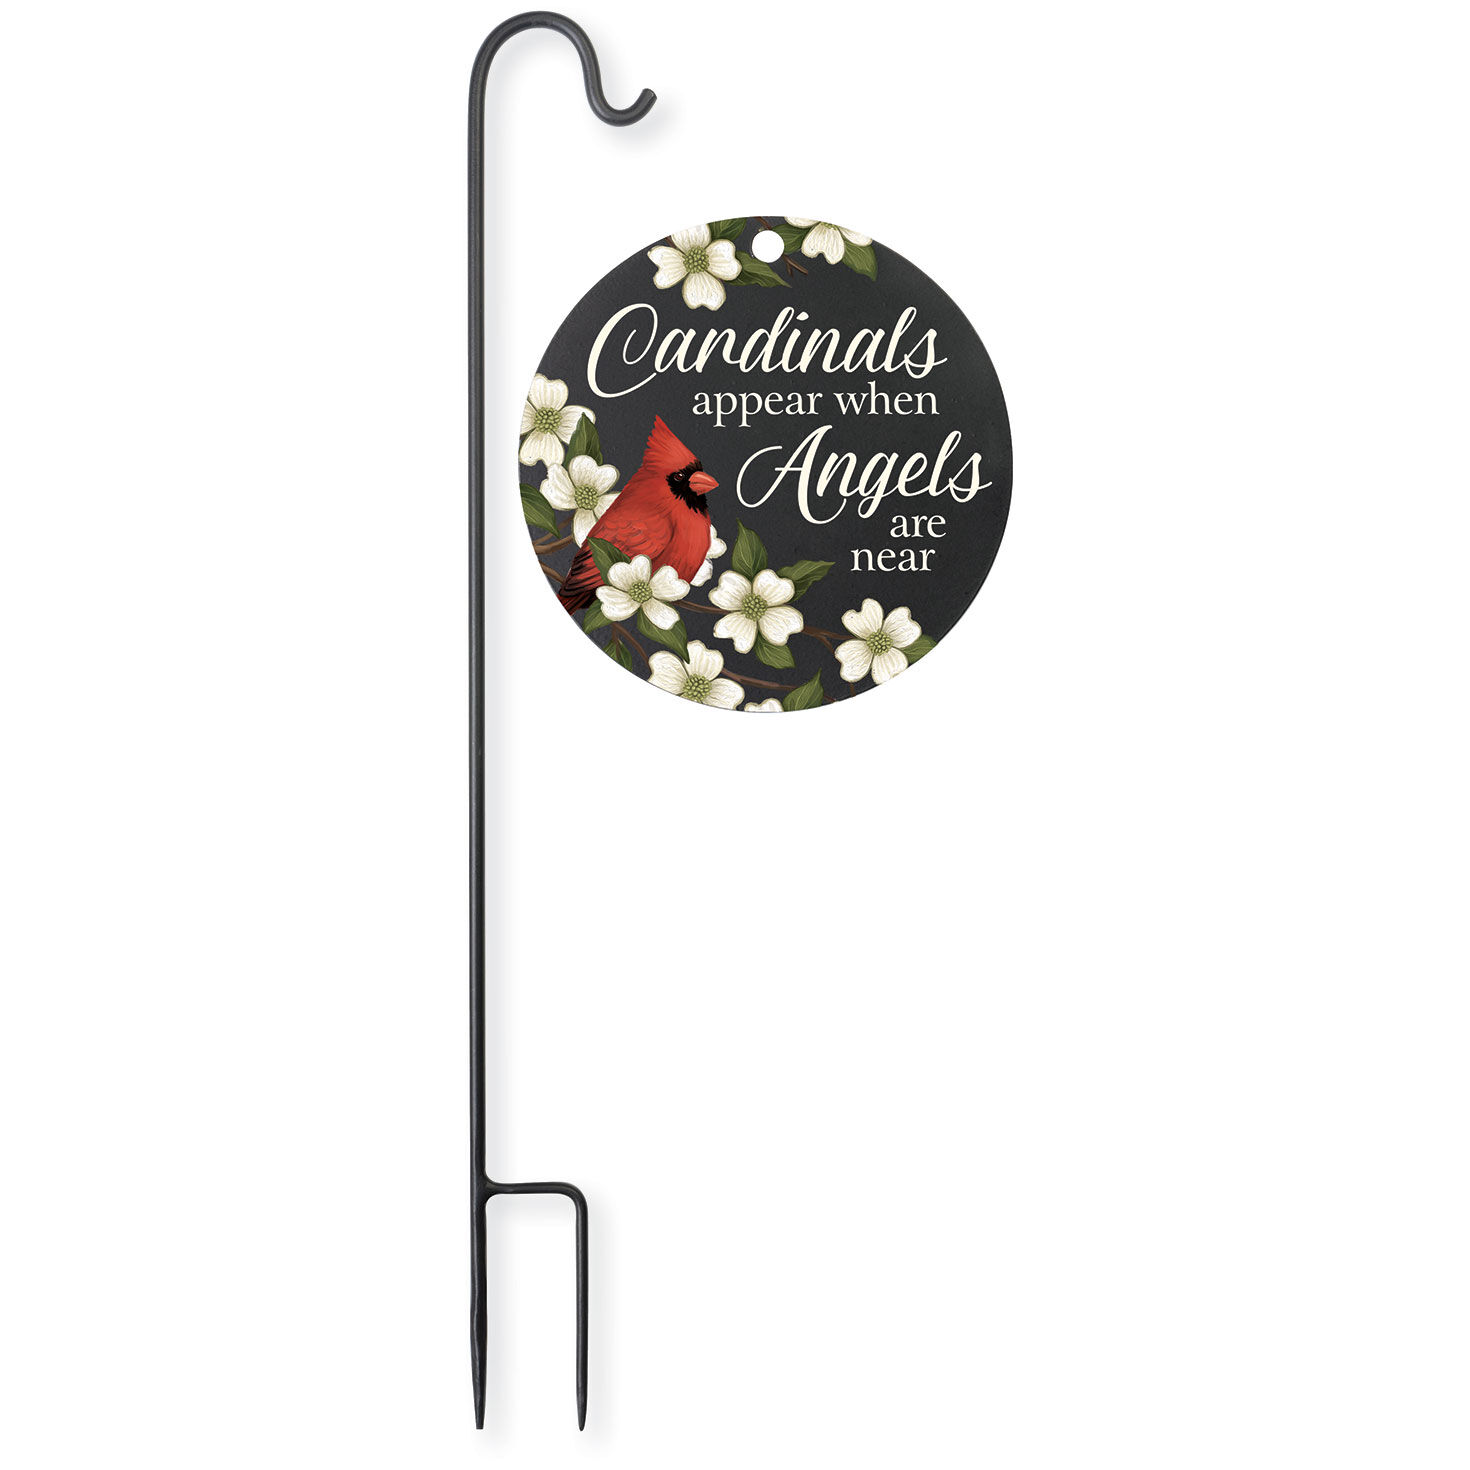 Carson Cardinals Appear Round Garden Sign for only USD 14.99 | Hallmark